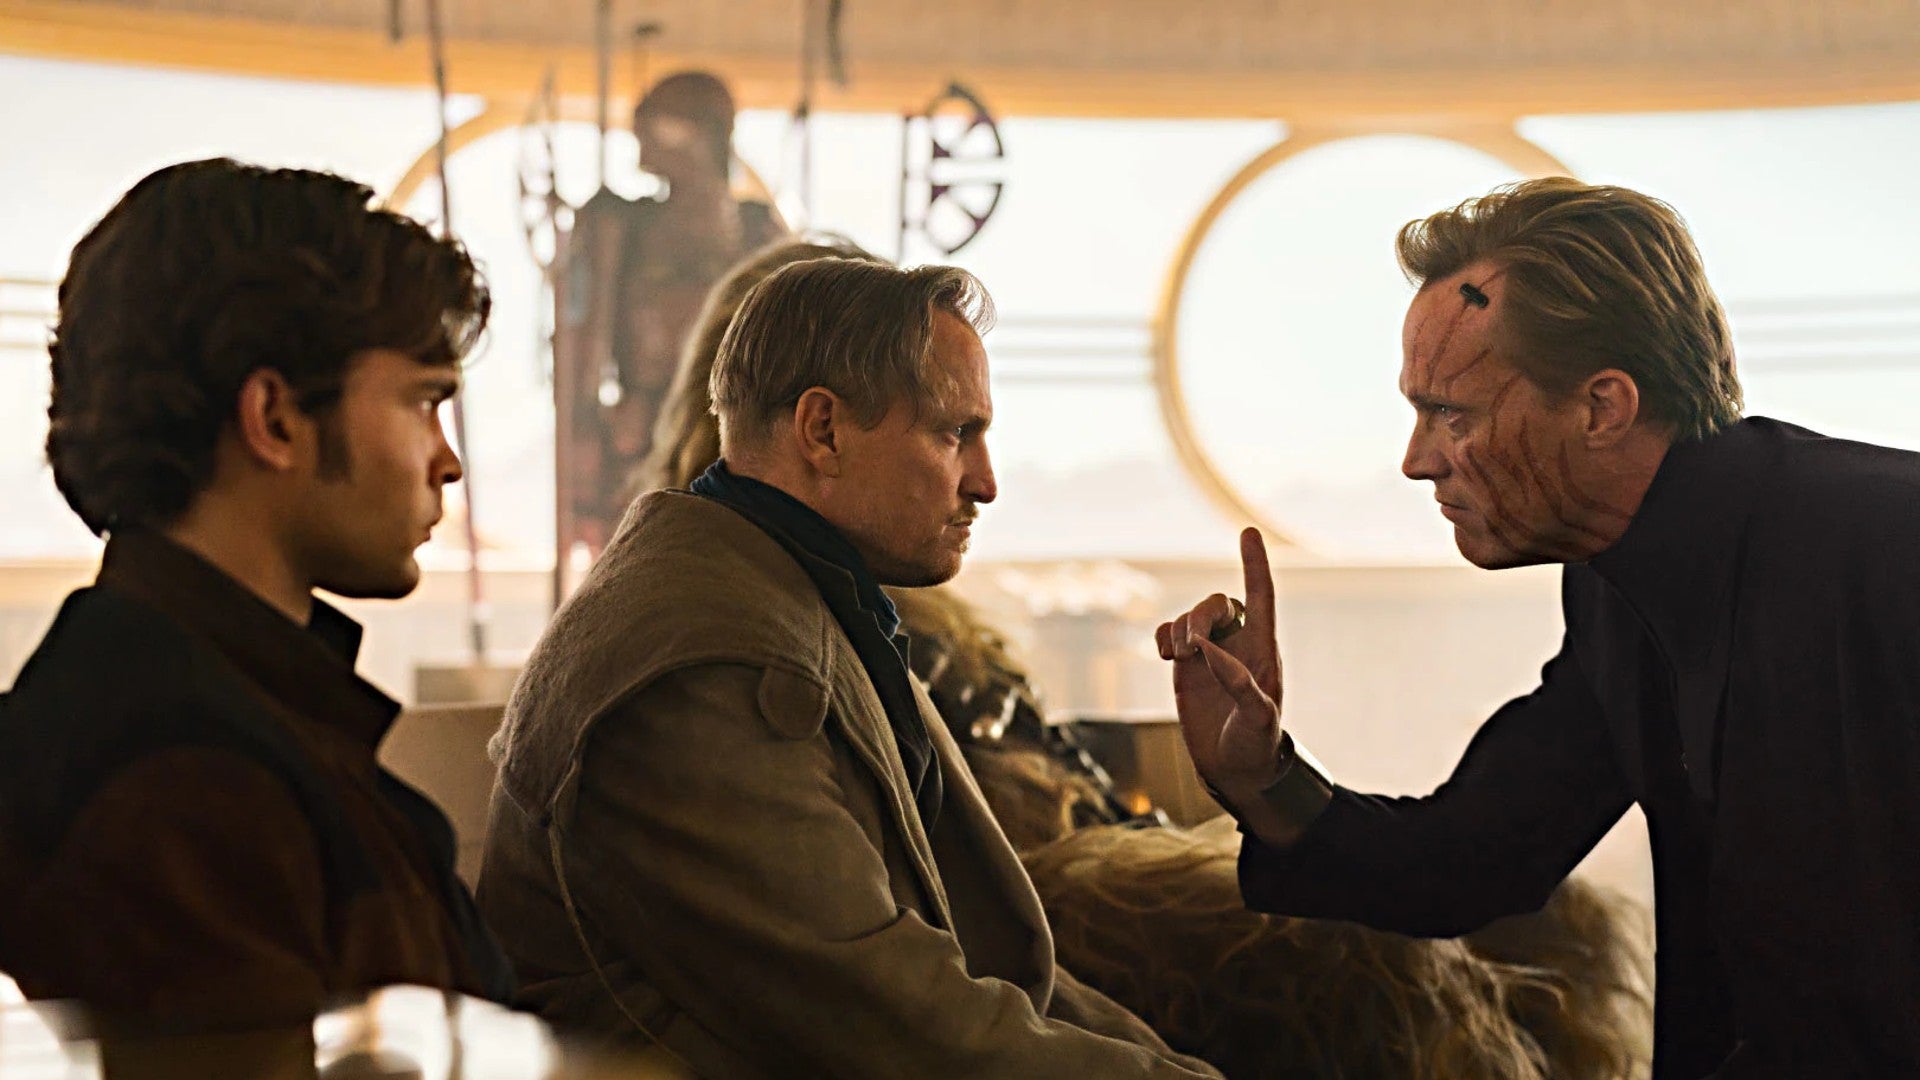 Solo: A Star Wars Story, Alden Ehrenreich as Han Solo and Woody Harrelson as Beckett speaking to Paul Bettany as Dryden Vos